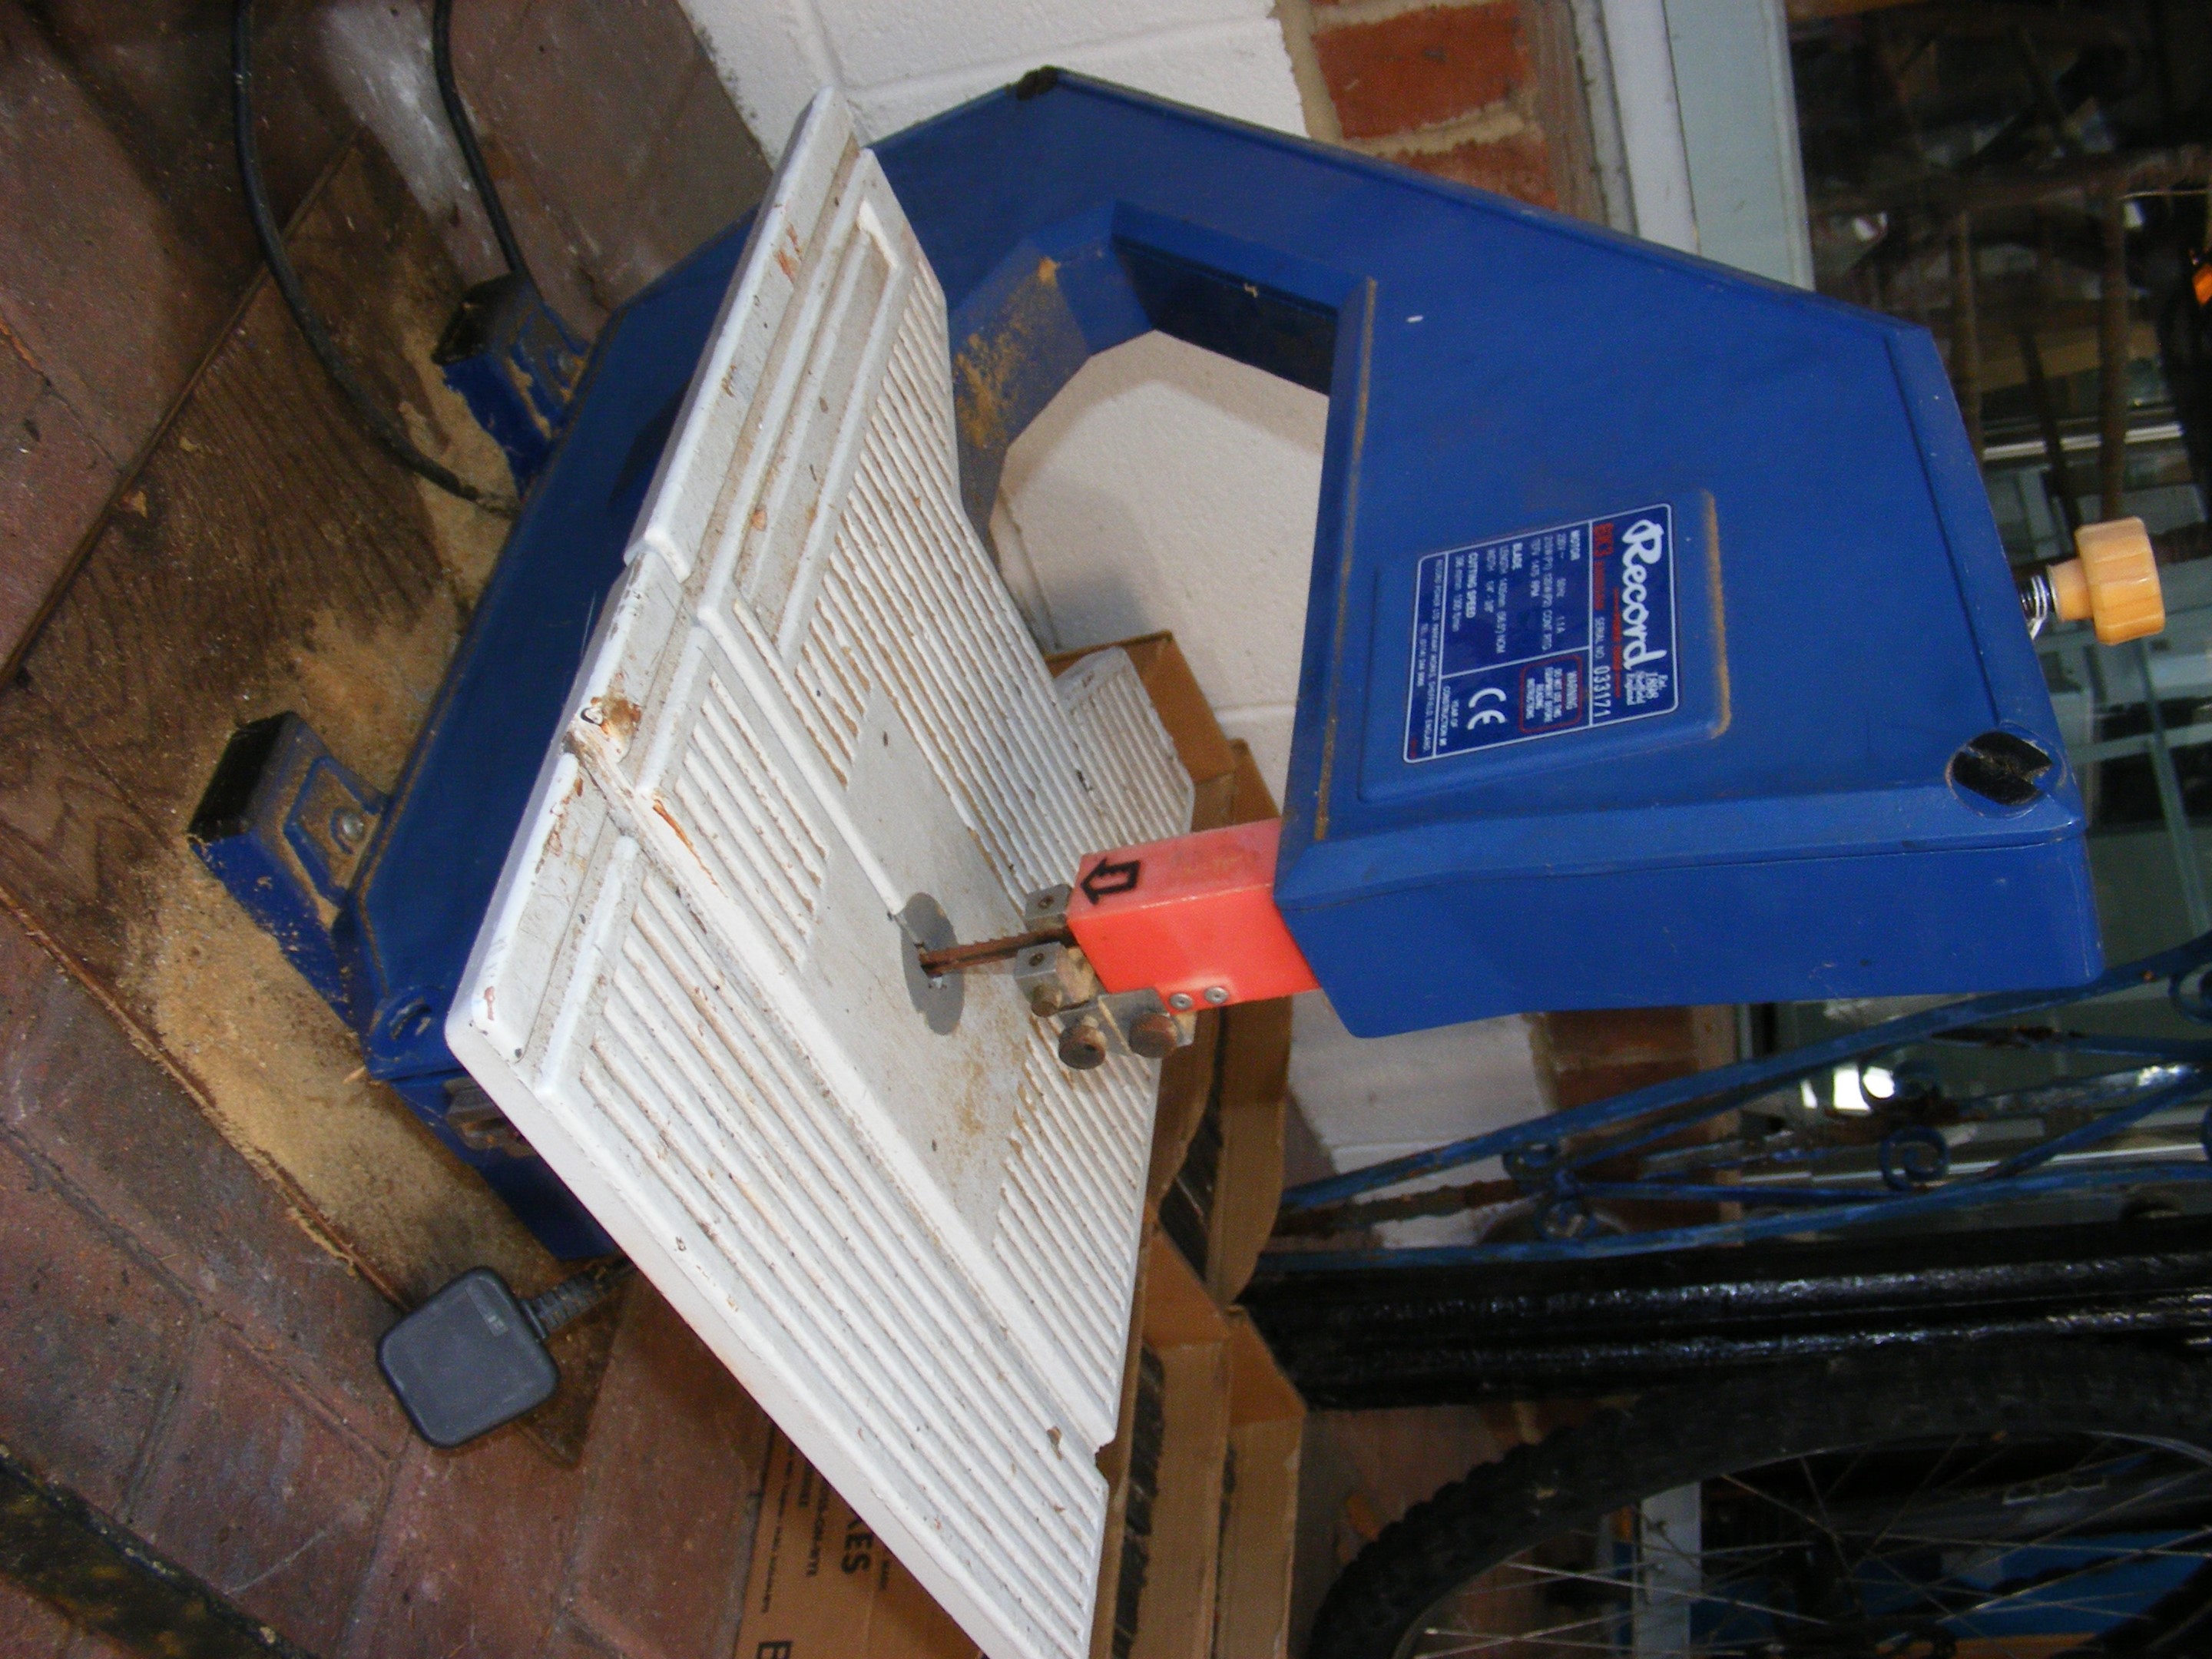 A Record Power Tools Worktop Jigsaw